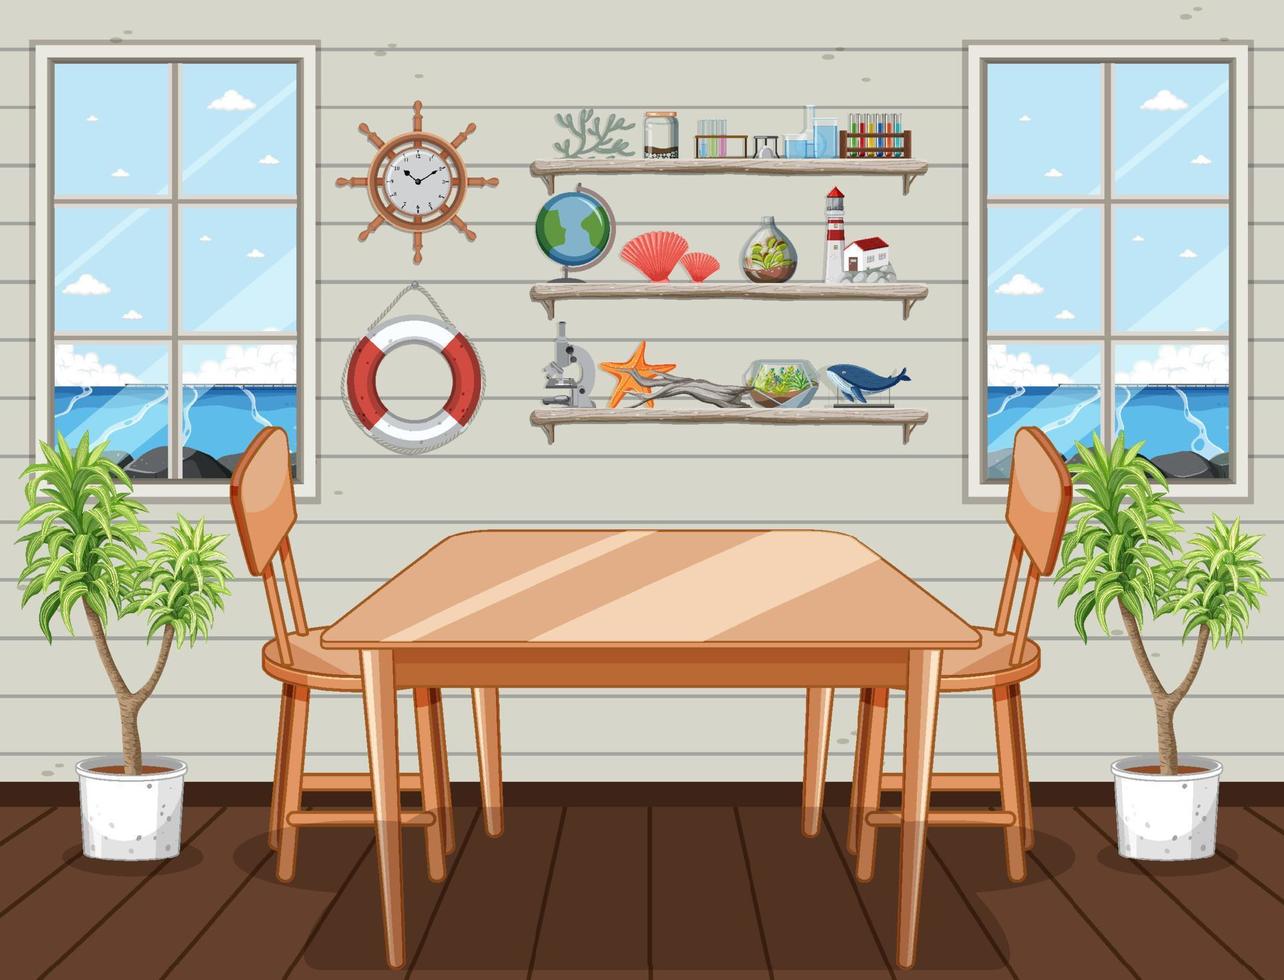 Room scene with miscellaneous objects on wall shelves vector